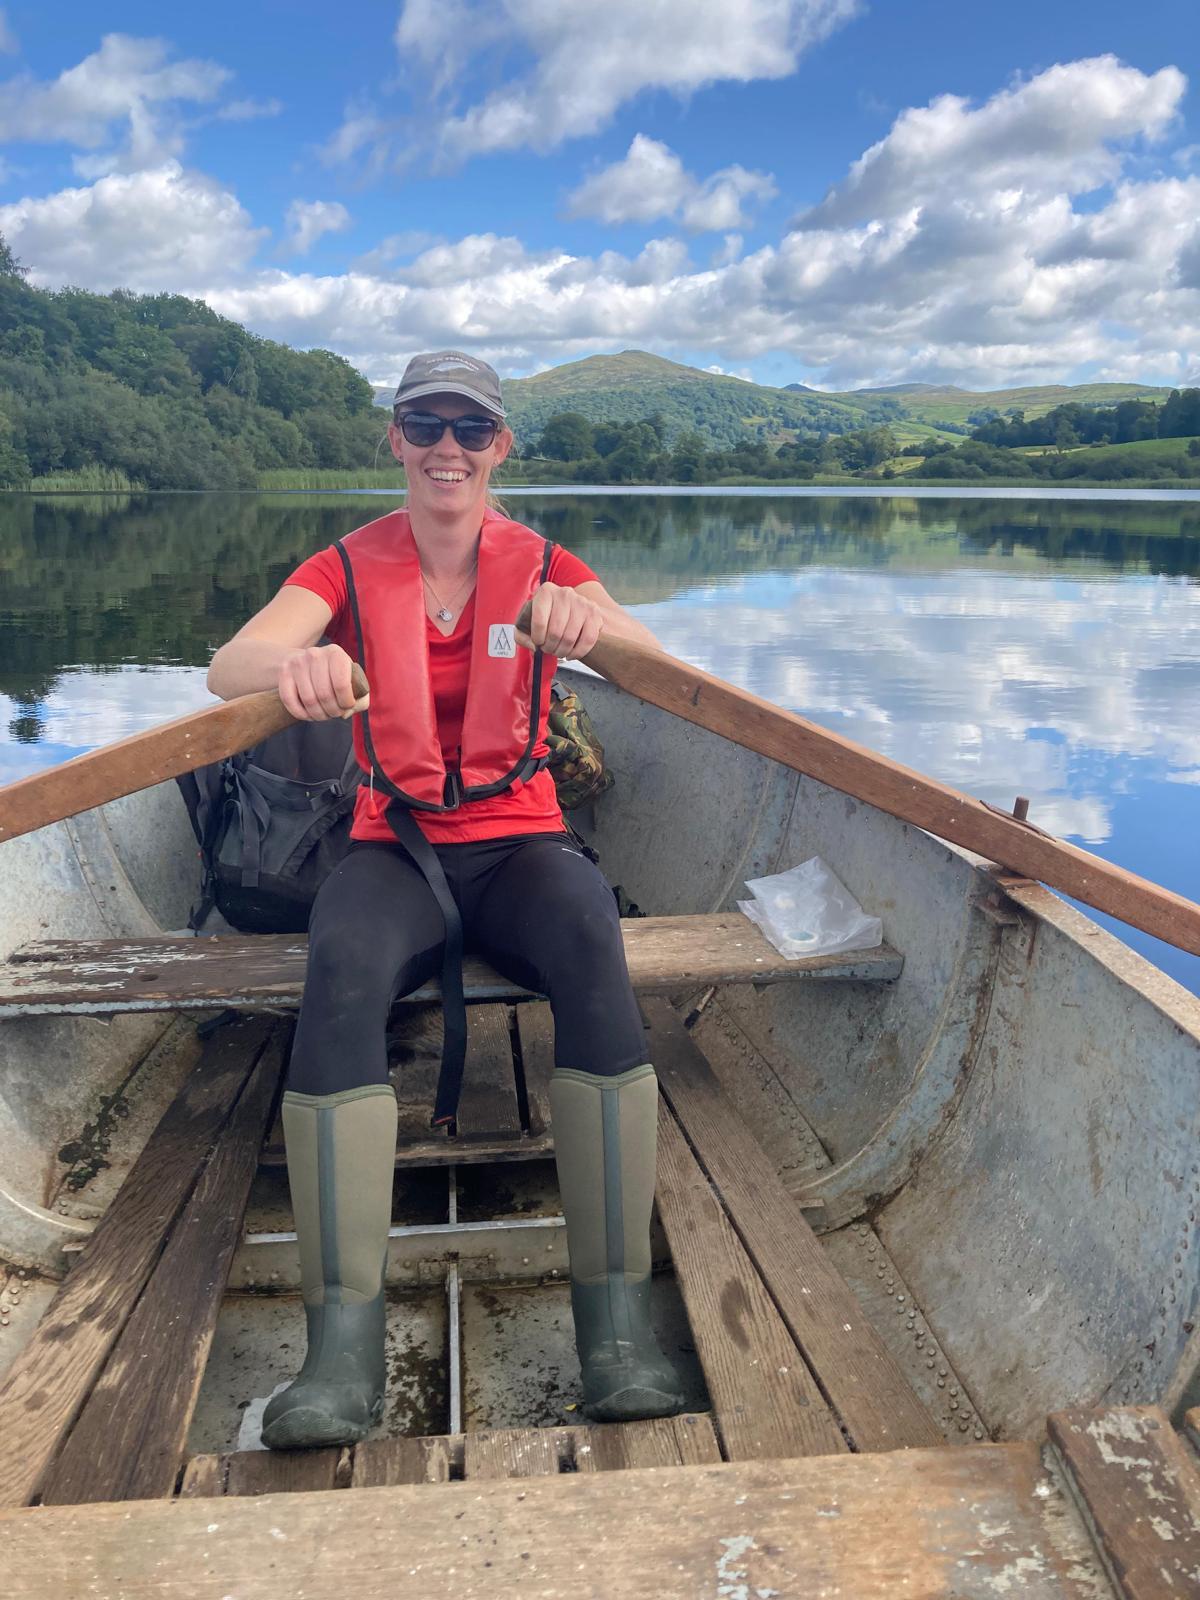 Field scientist rowing on a lake